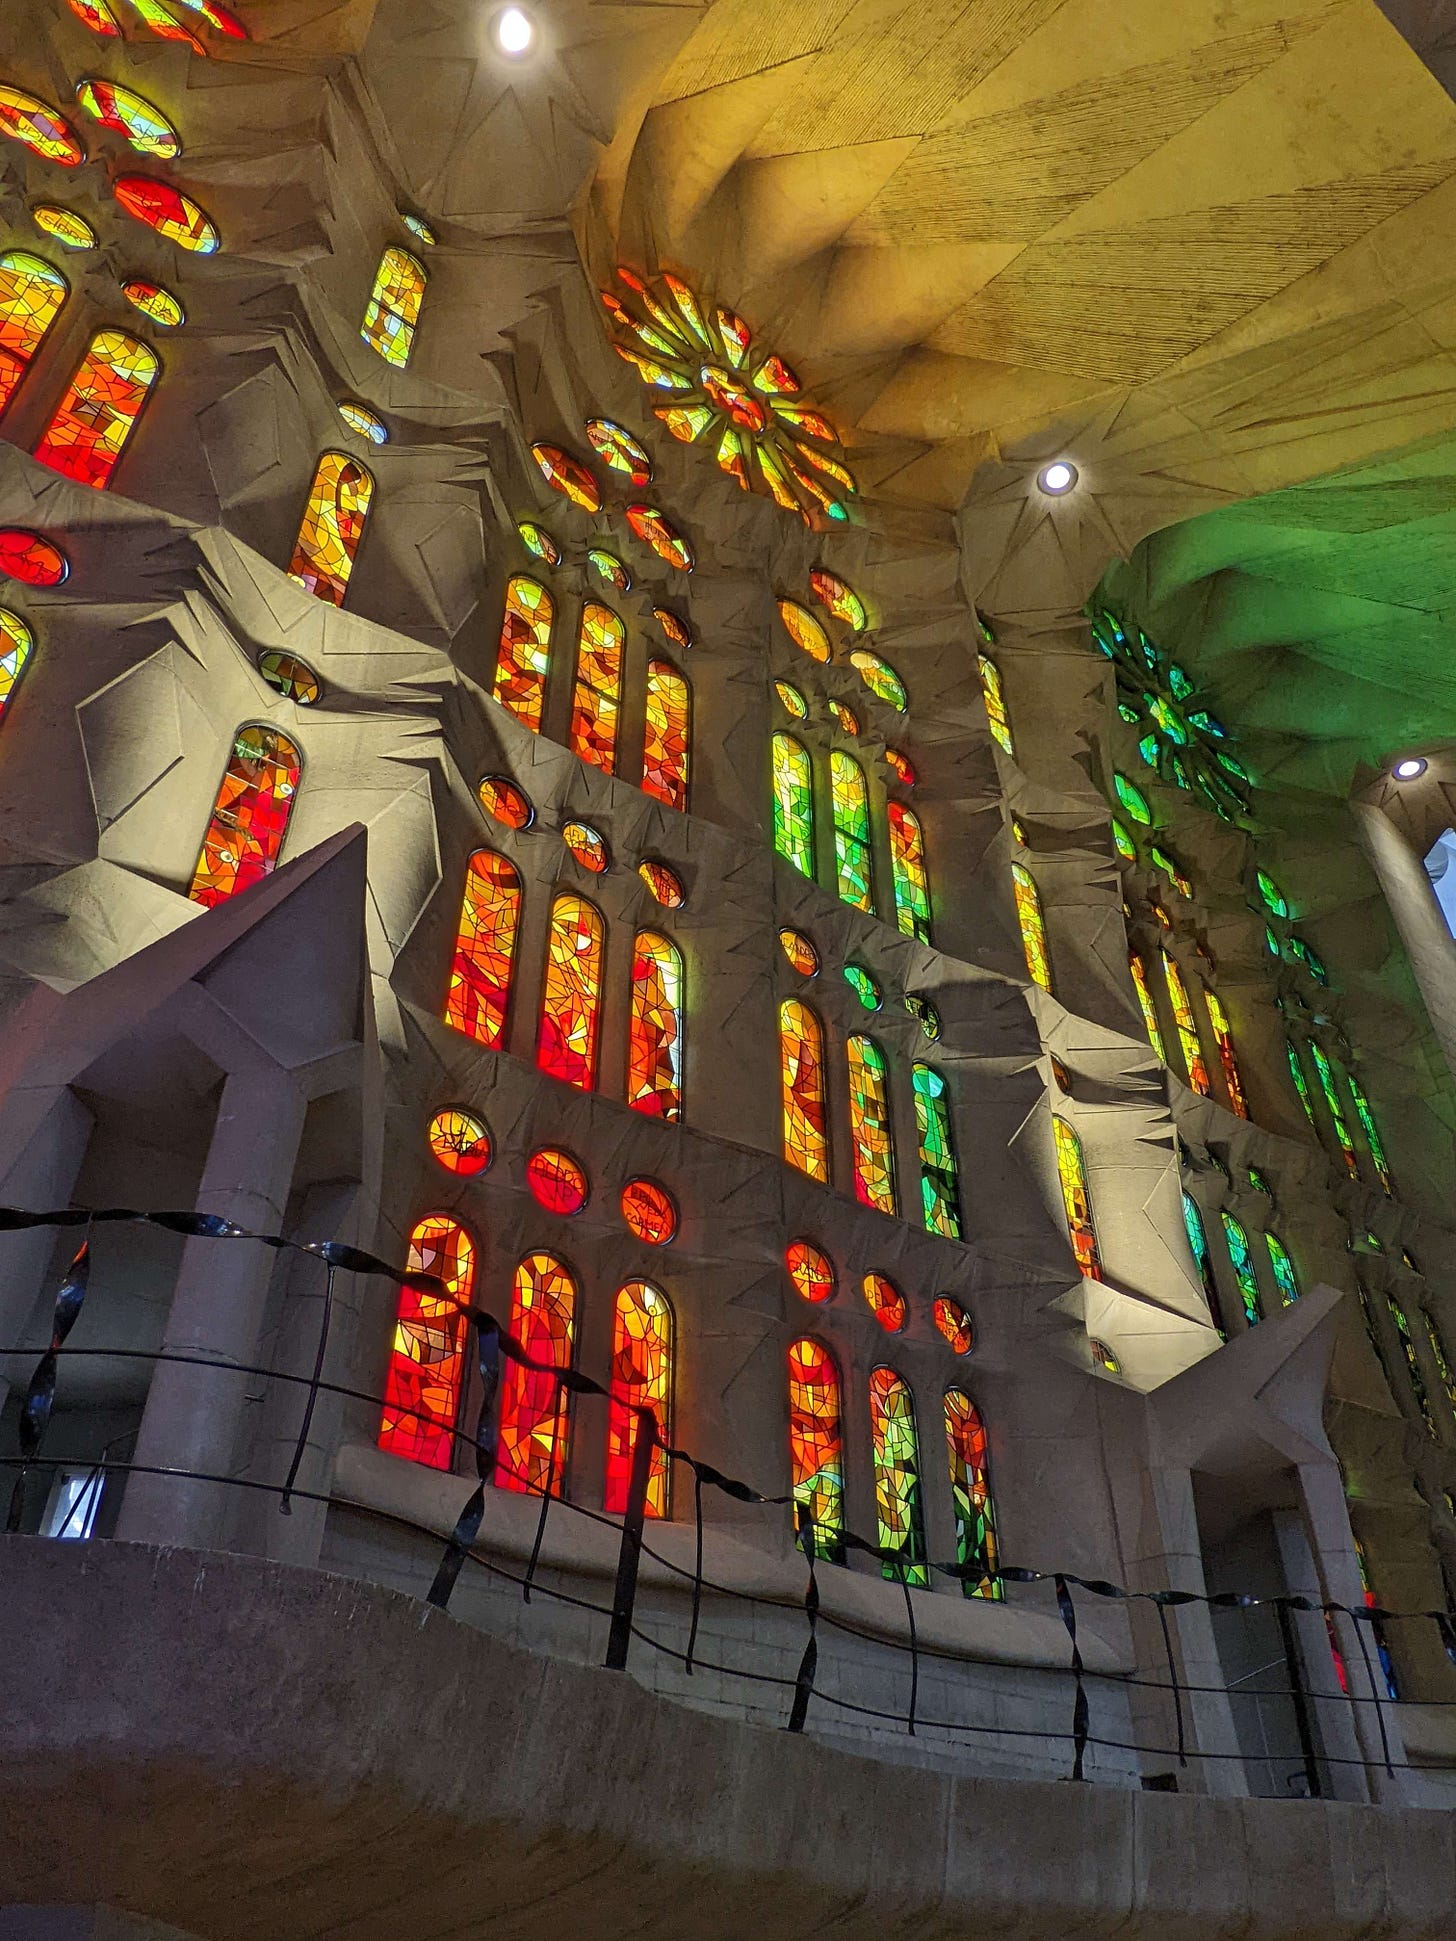 An interior shot of the stained glass of the Sagrada Familia. Orange and yellow and red glass lights up so brightly that the white stone underneath seems to glow.